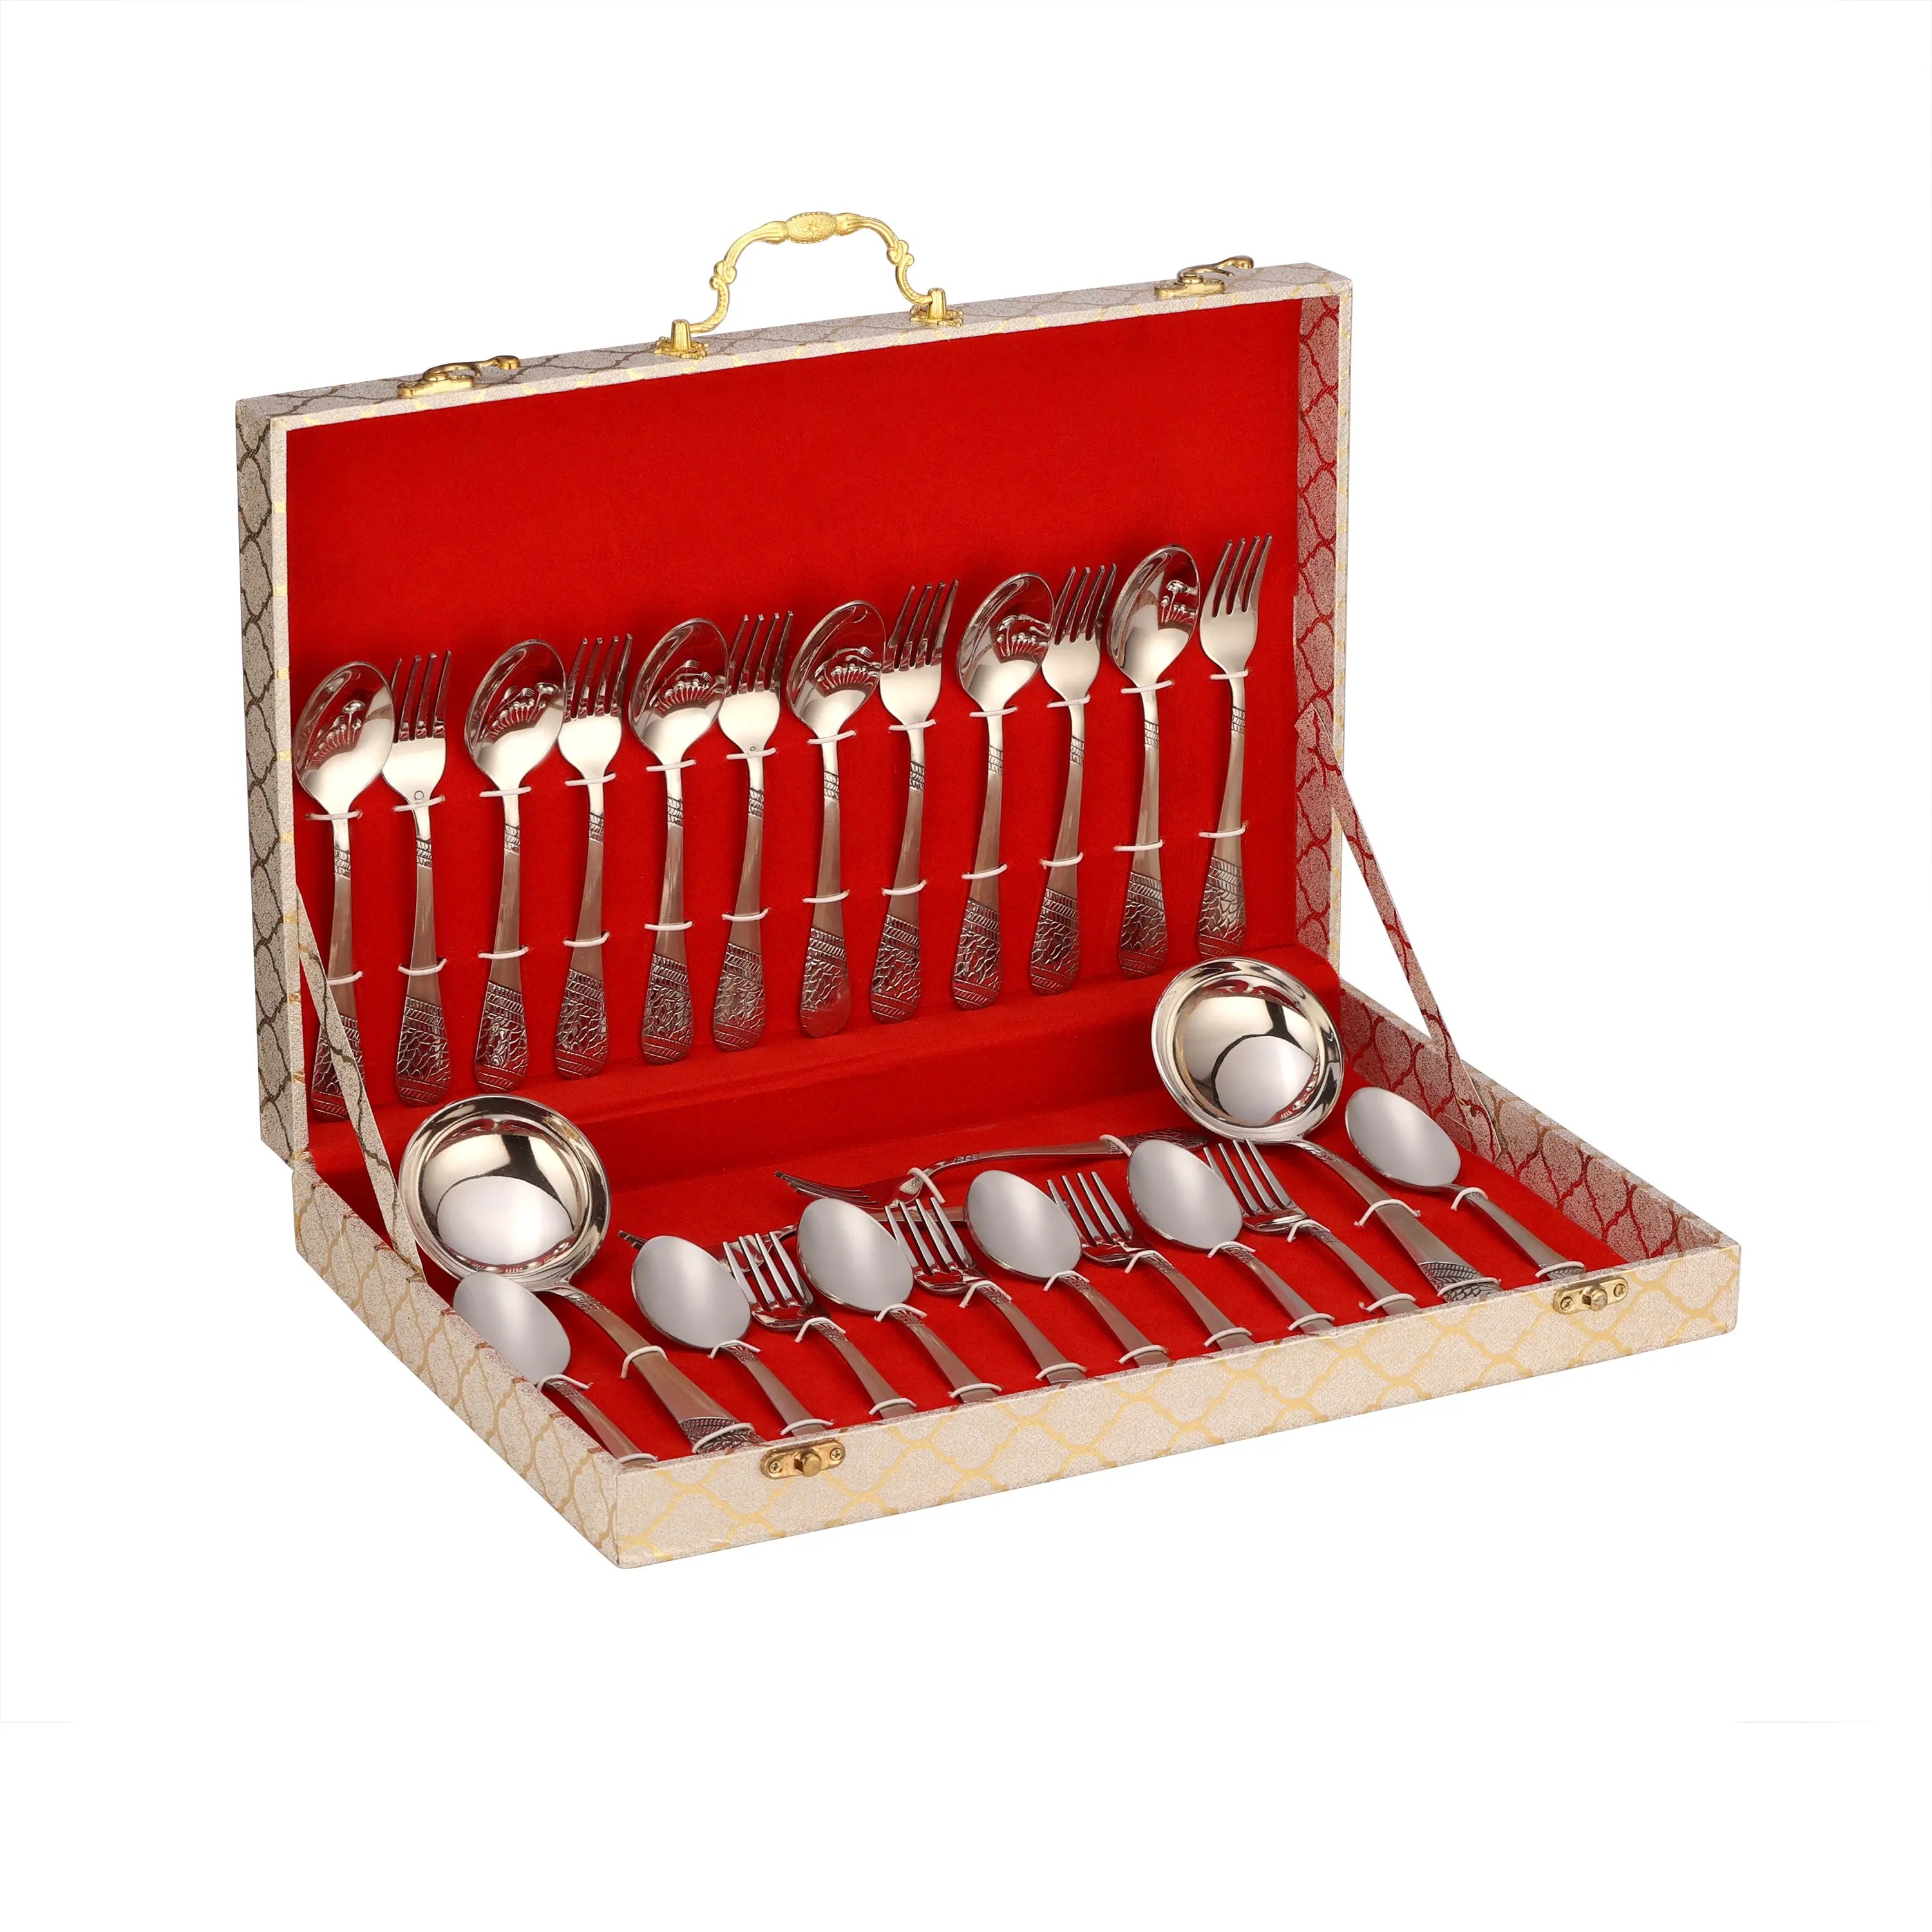 STAINLESS STEEL CUTTLERY 12 G SET -26 PCS WITH VELVET BOX - CROCKERY WALA AND COMPANY 